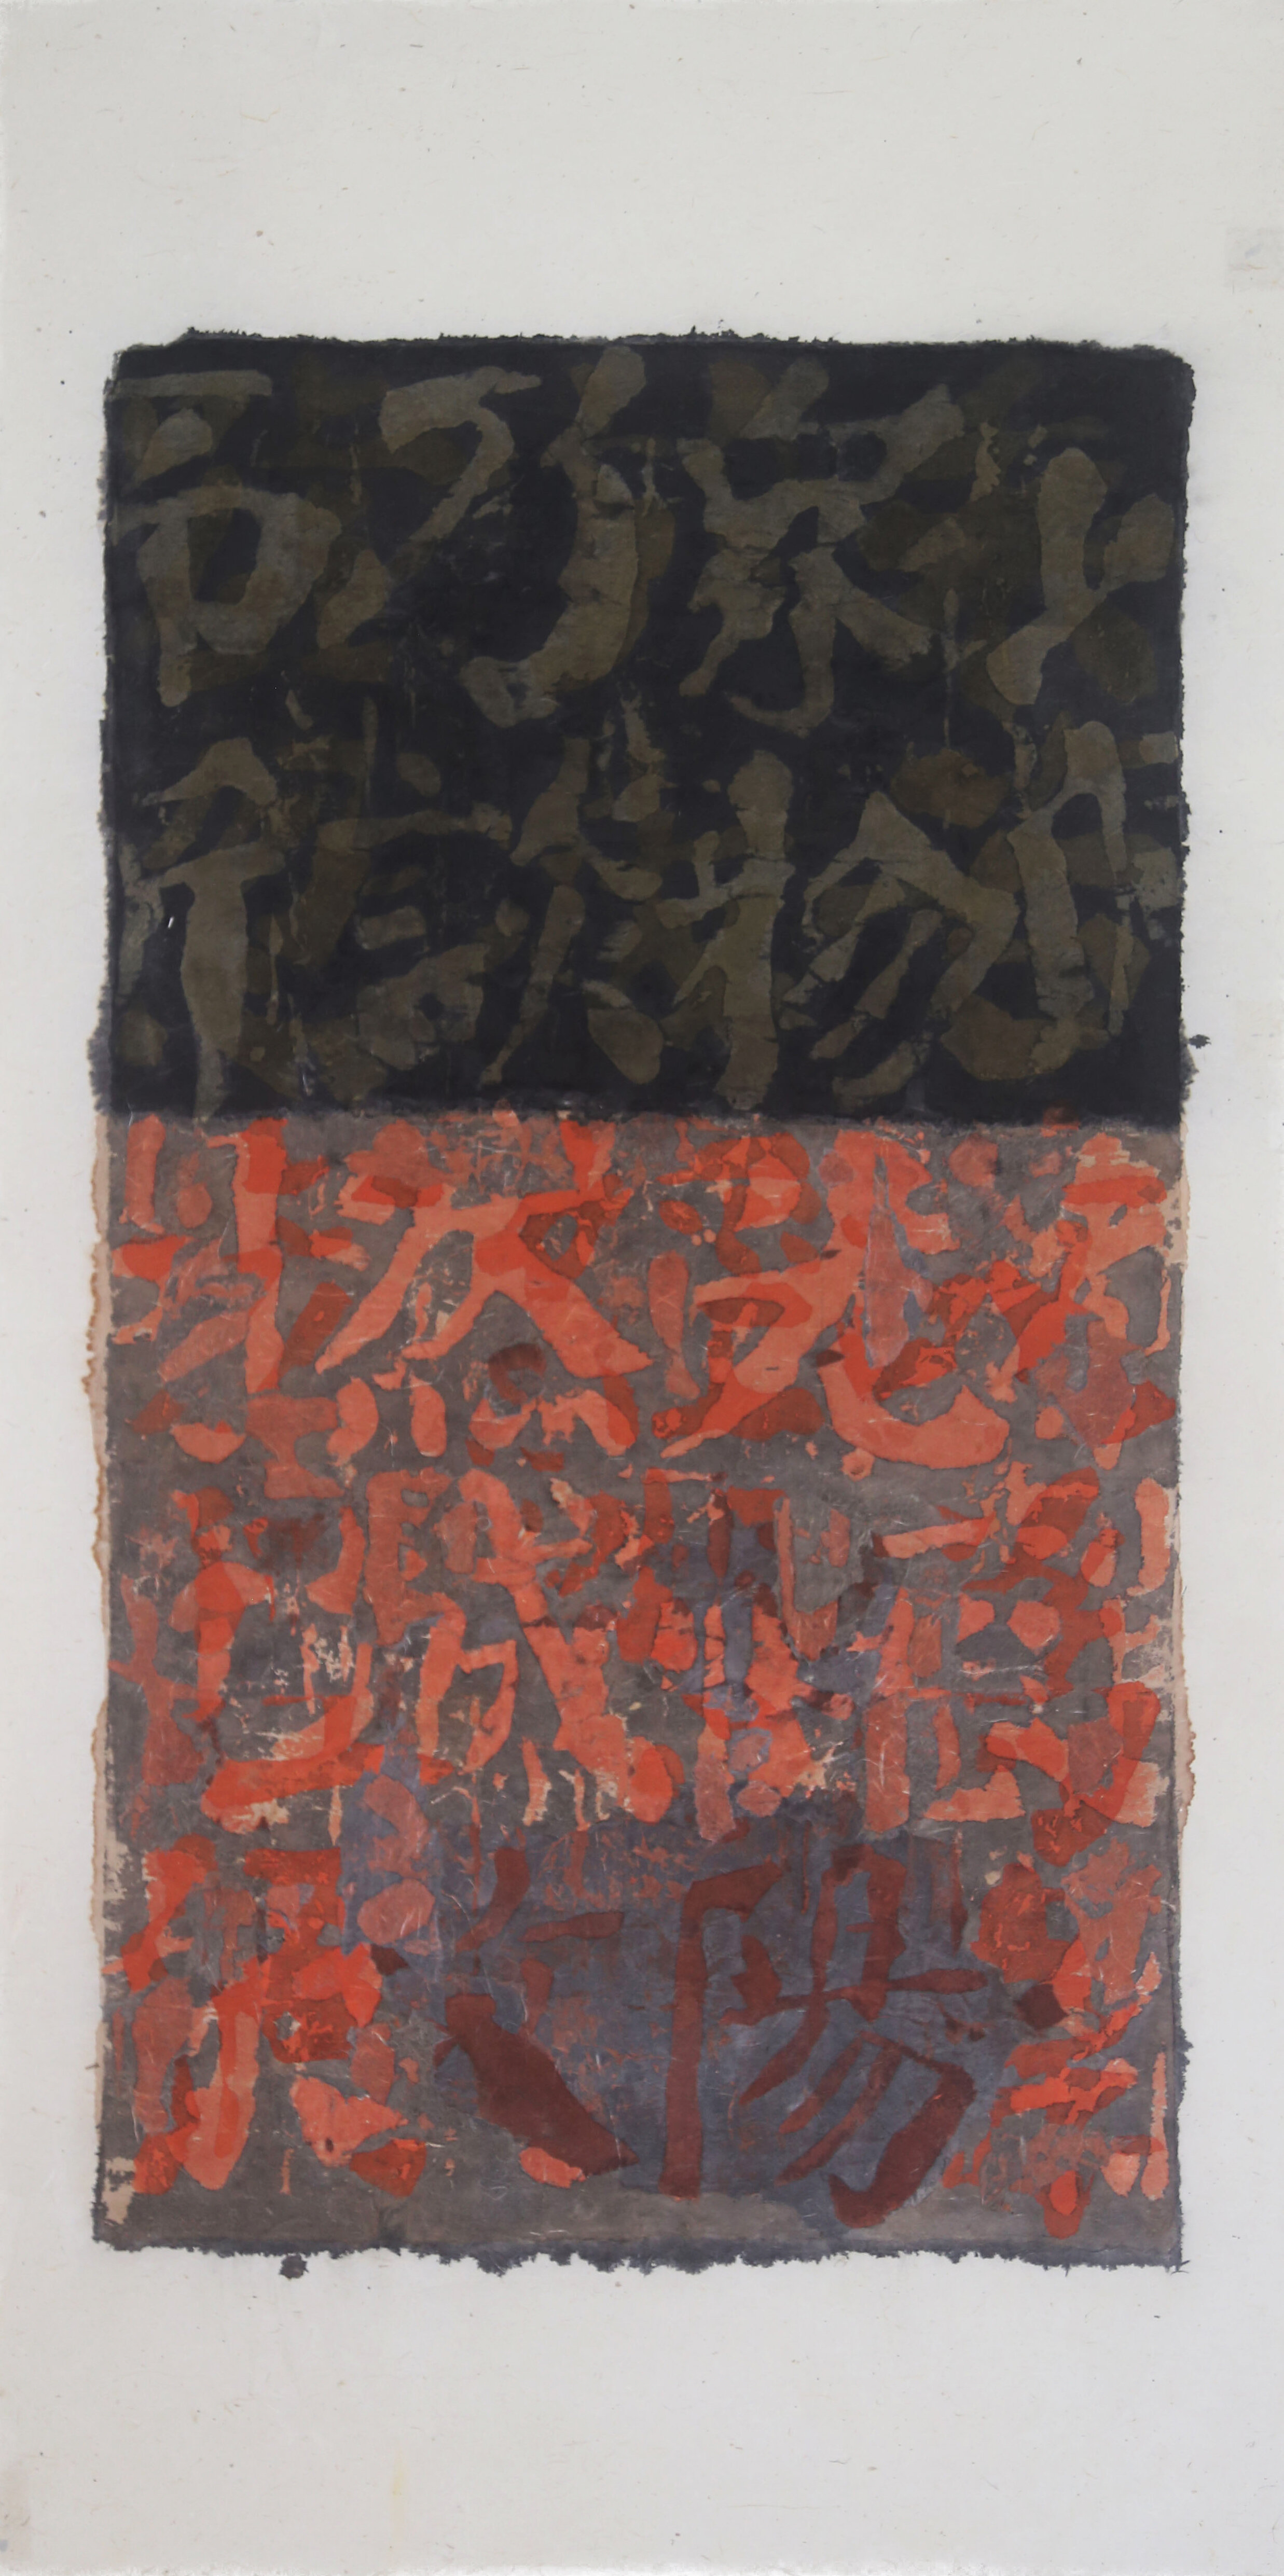  Wei Jia,  No. 16201 , 2016. Gouache, ink and Xuan paper collage on paper, 57 x 29 inches ©Wei Jia, courtesy Fou Gallery   